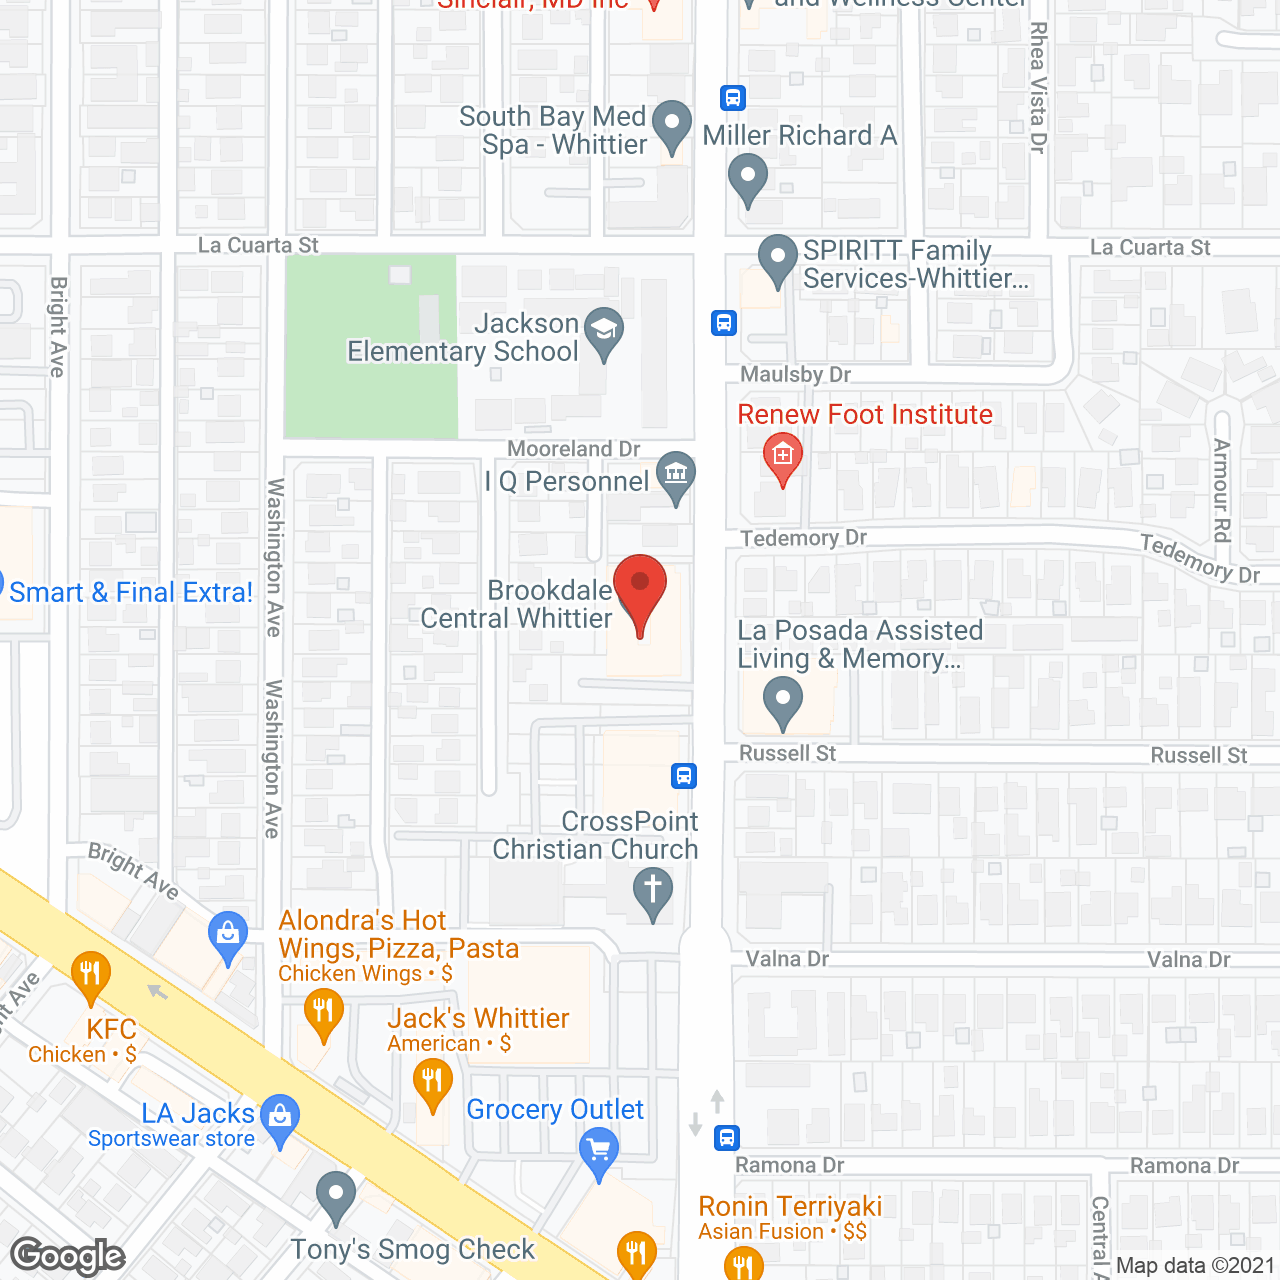 Brookdale Central Whittier in google map